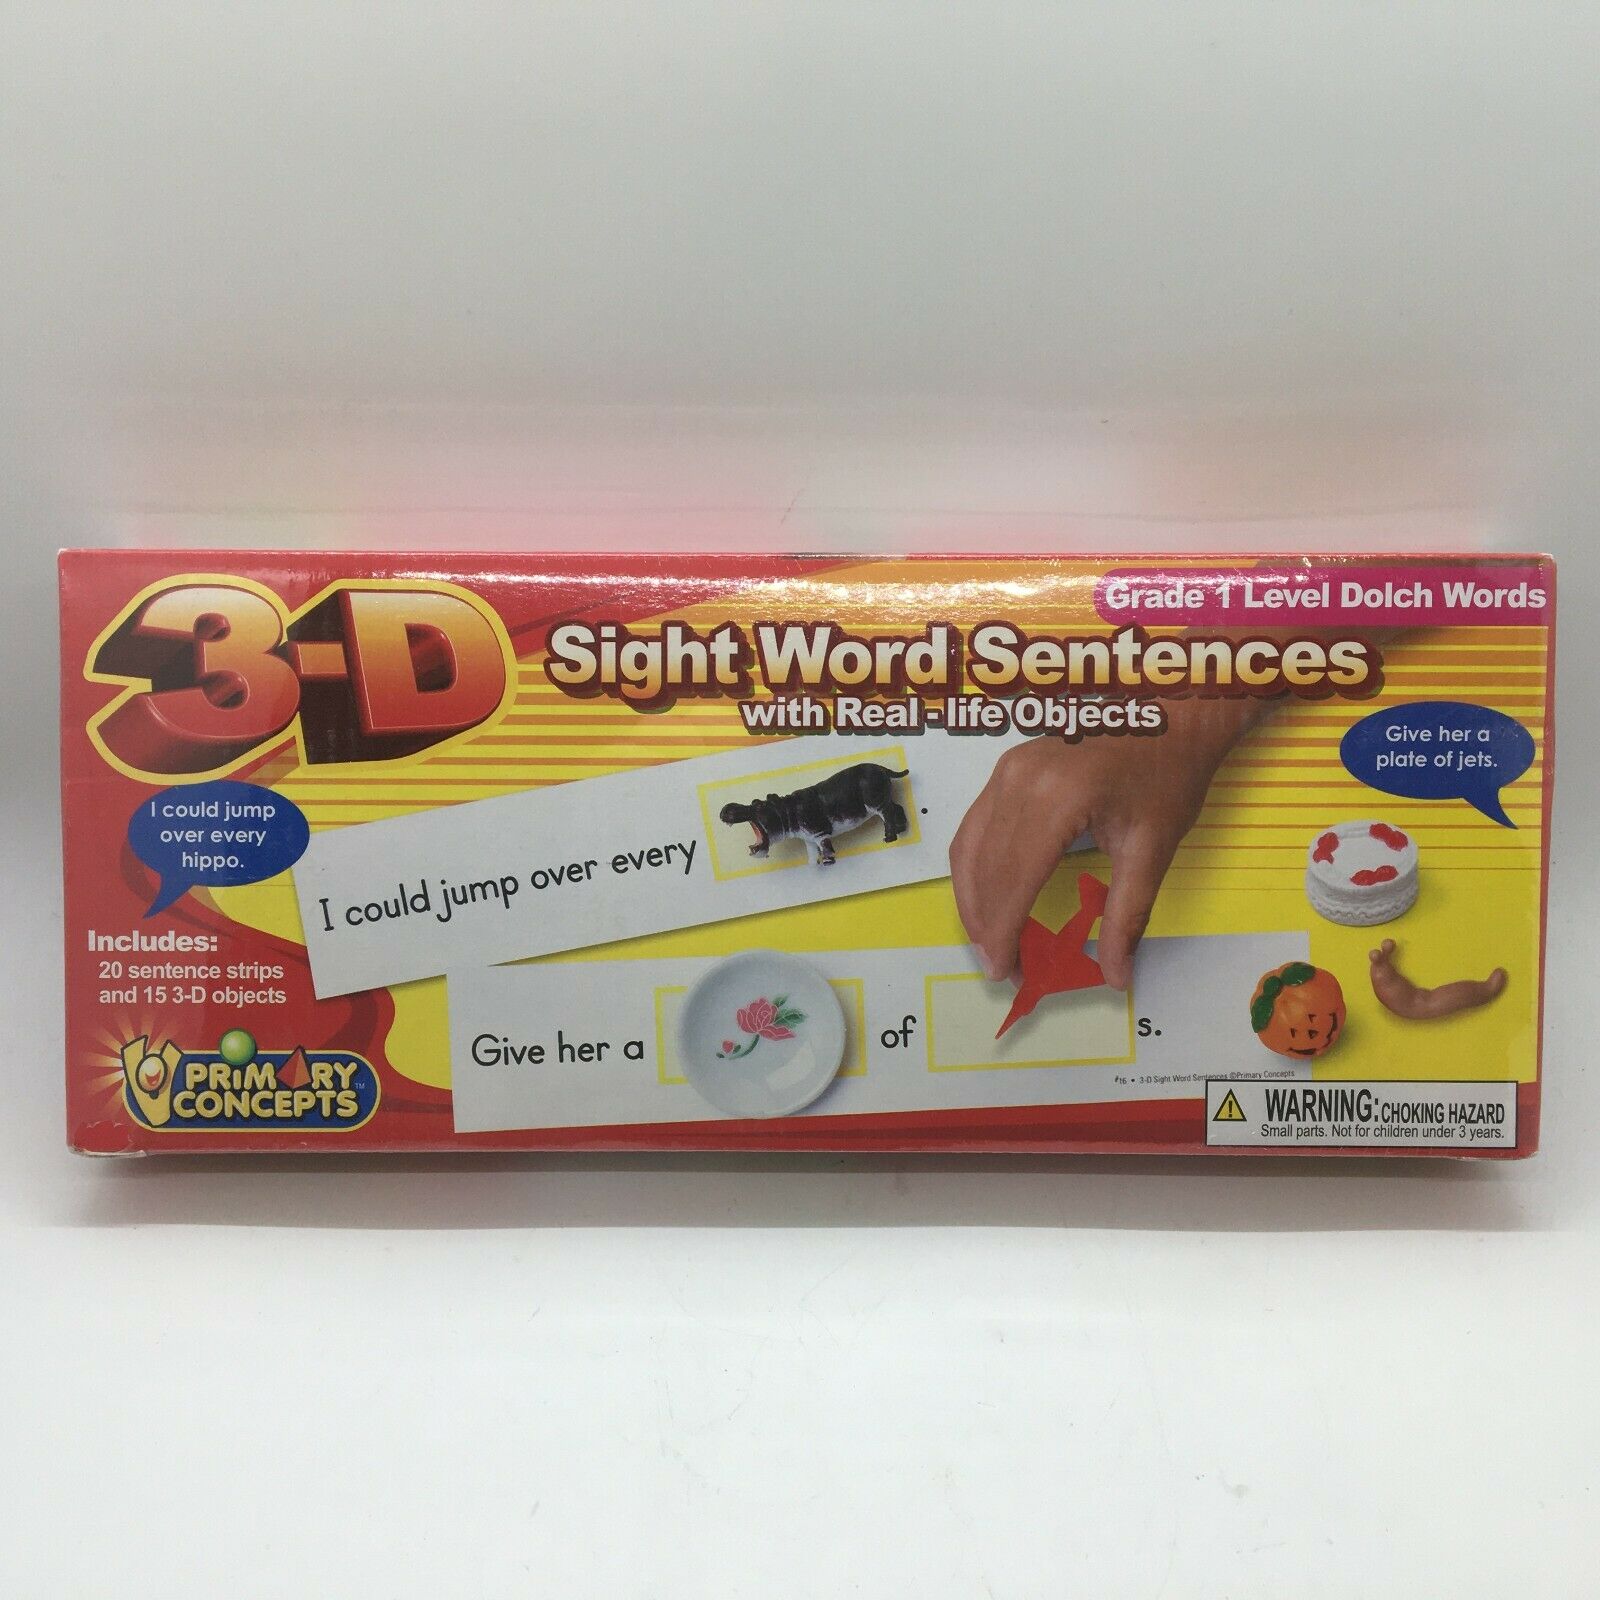 Primary Concepts Pc-5282 3-d Sight Word Sentences Grade 1 Level Dolch Words New